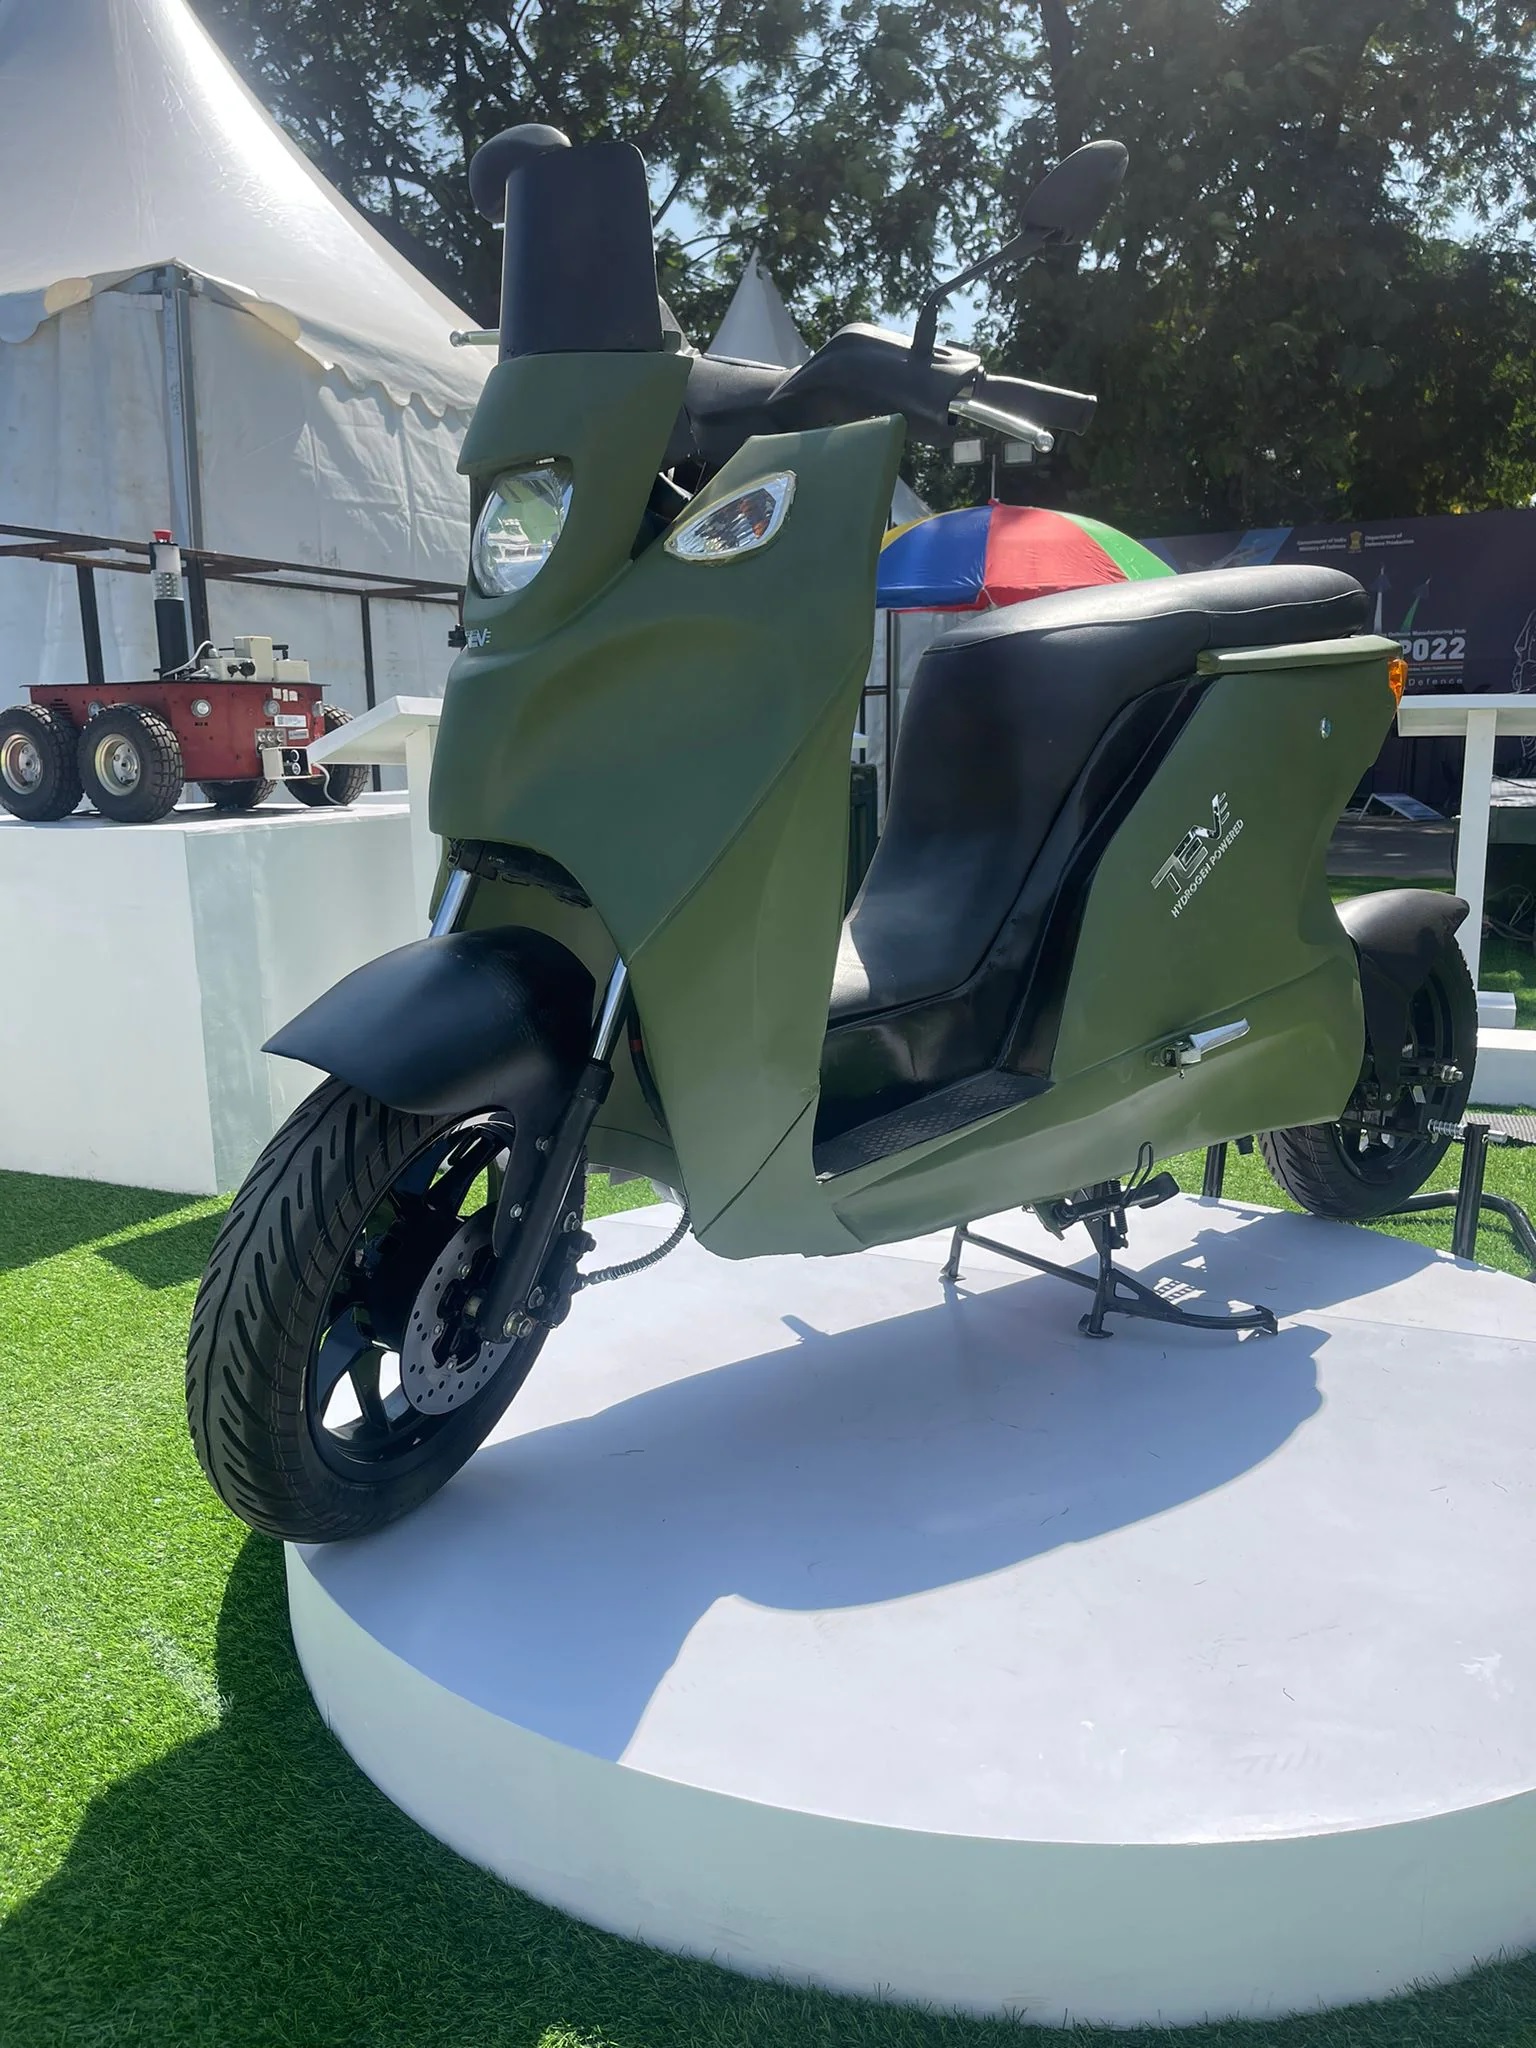 The country's first hydrogen bike will be made in Gujarat! Gujarat will get another new identity
